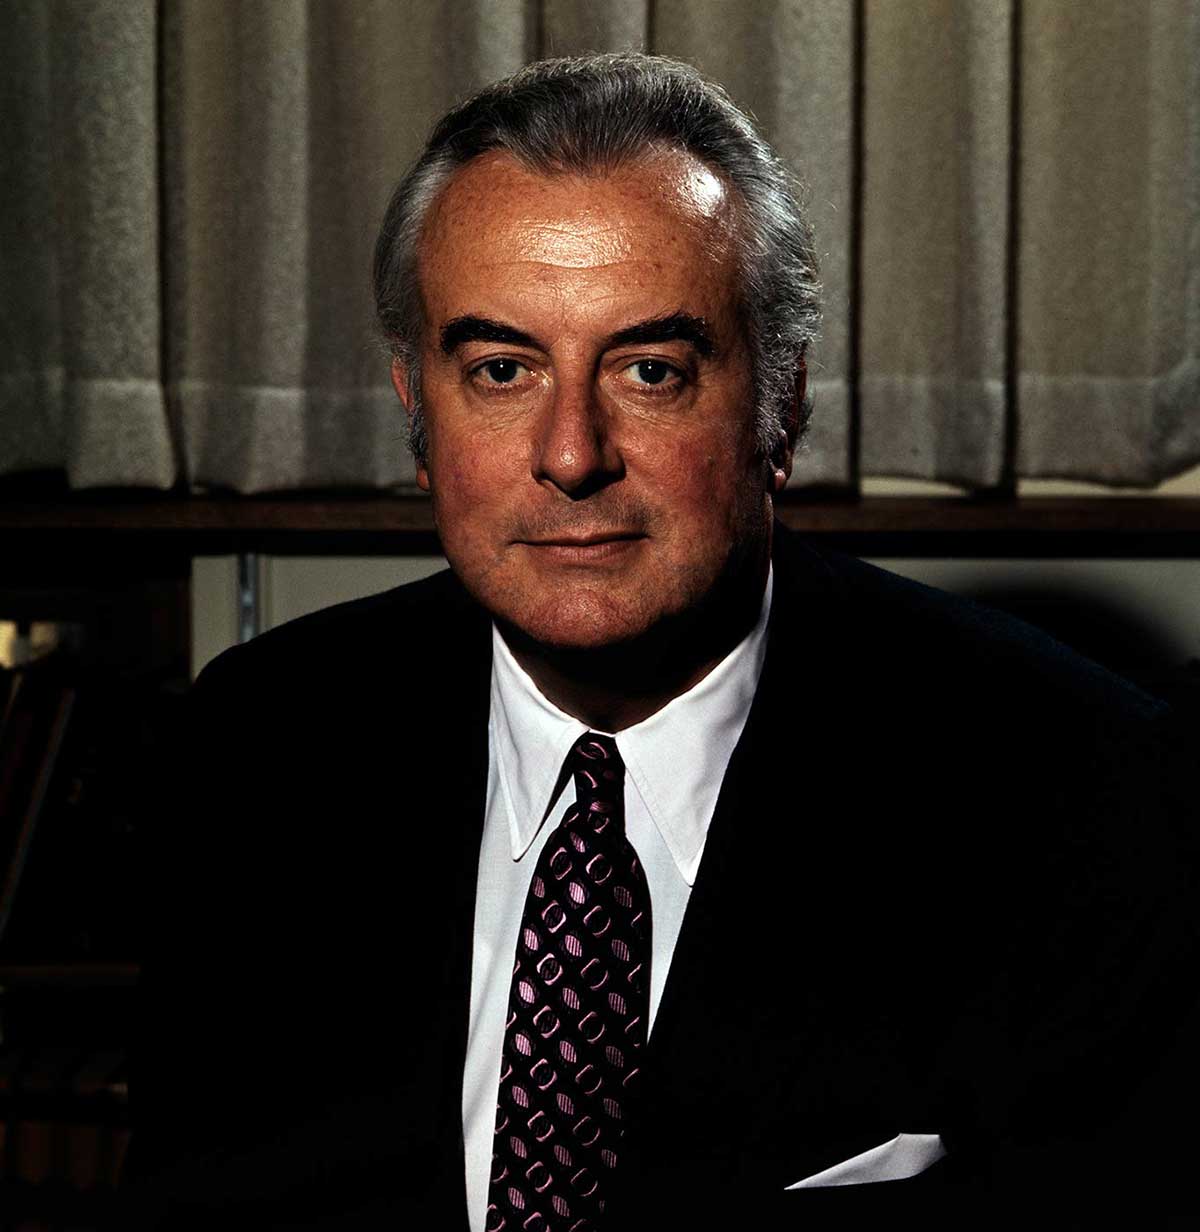 Black and white portrait photo of Gough Whitlam. - click to view larger image